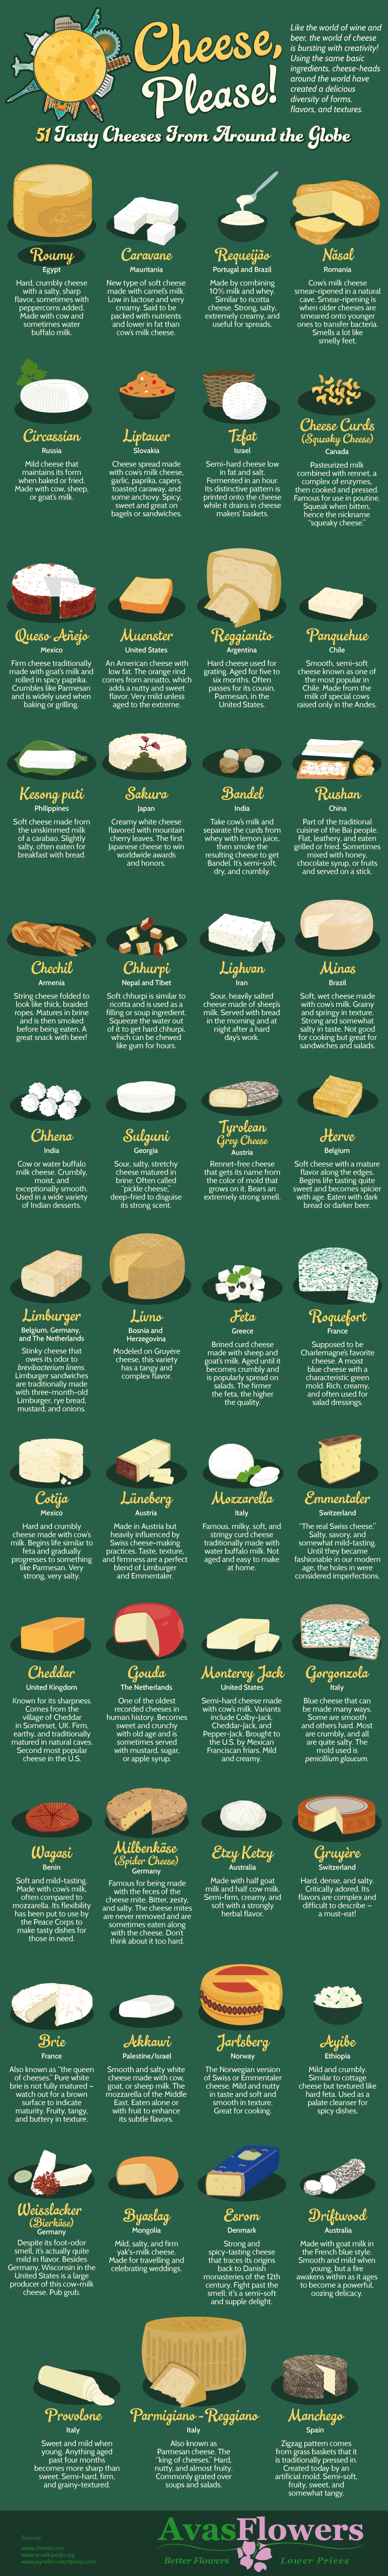 http://www.avasflowers.net/images/infographics/51TastyCheesesOK.png